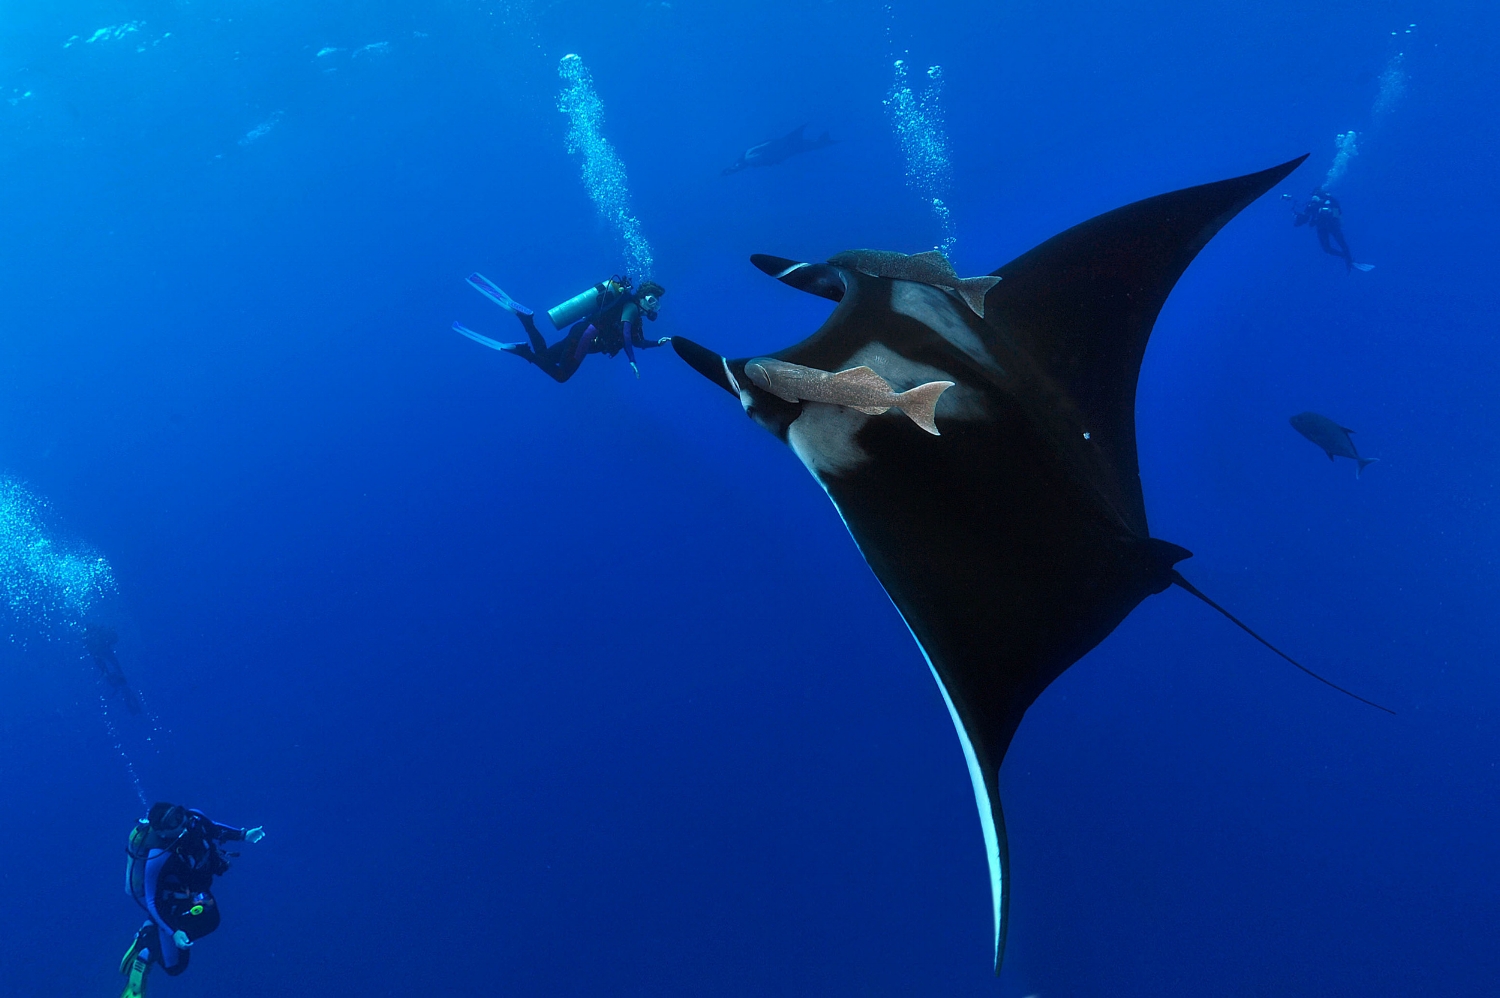  Diver Darlene Ott approaches a giant manta ray (Manta birostris) at a dive site called 'El Boiler" at the Revillagigedo Islands on Thursday, May 28, 2010. (Though she appears to be touching the manta, she is actually several feet further from the ca